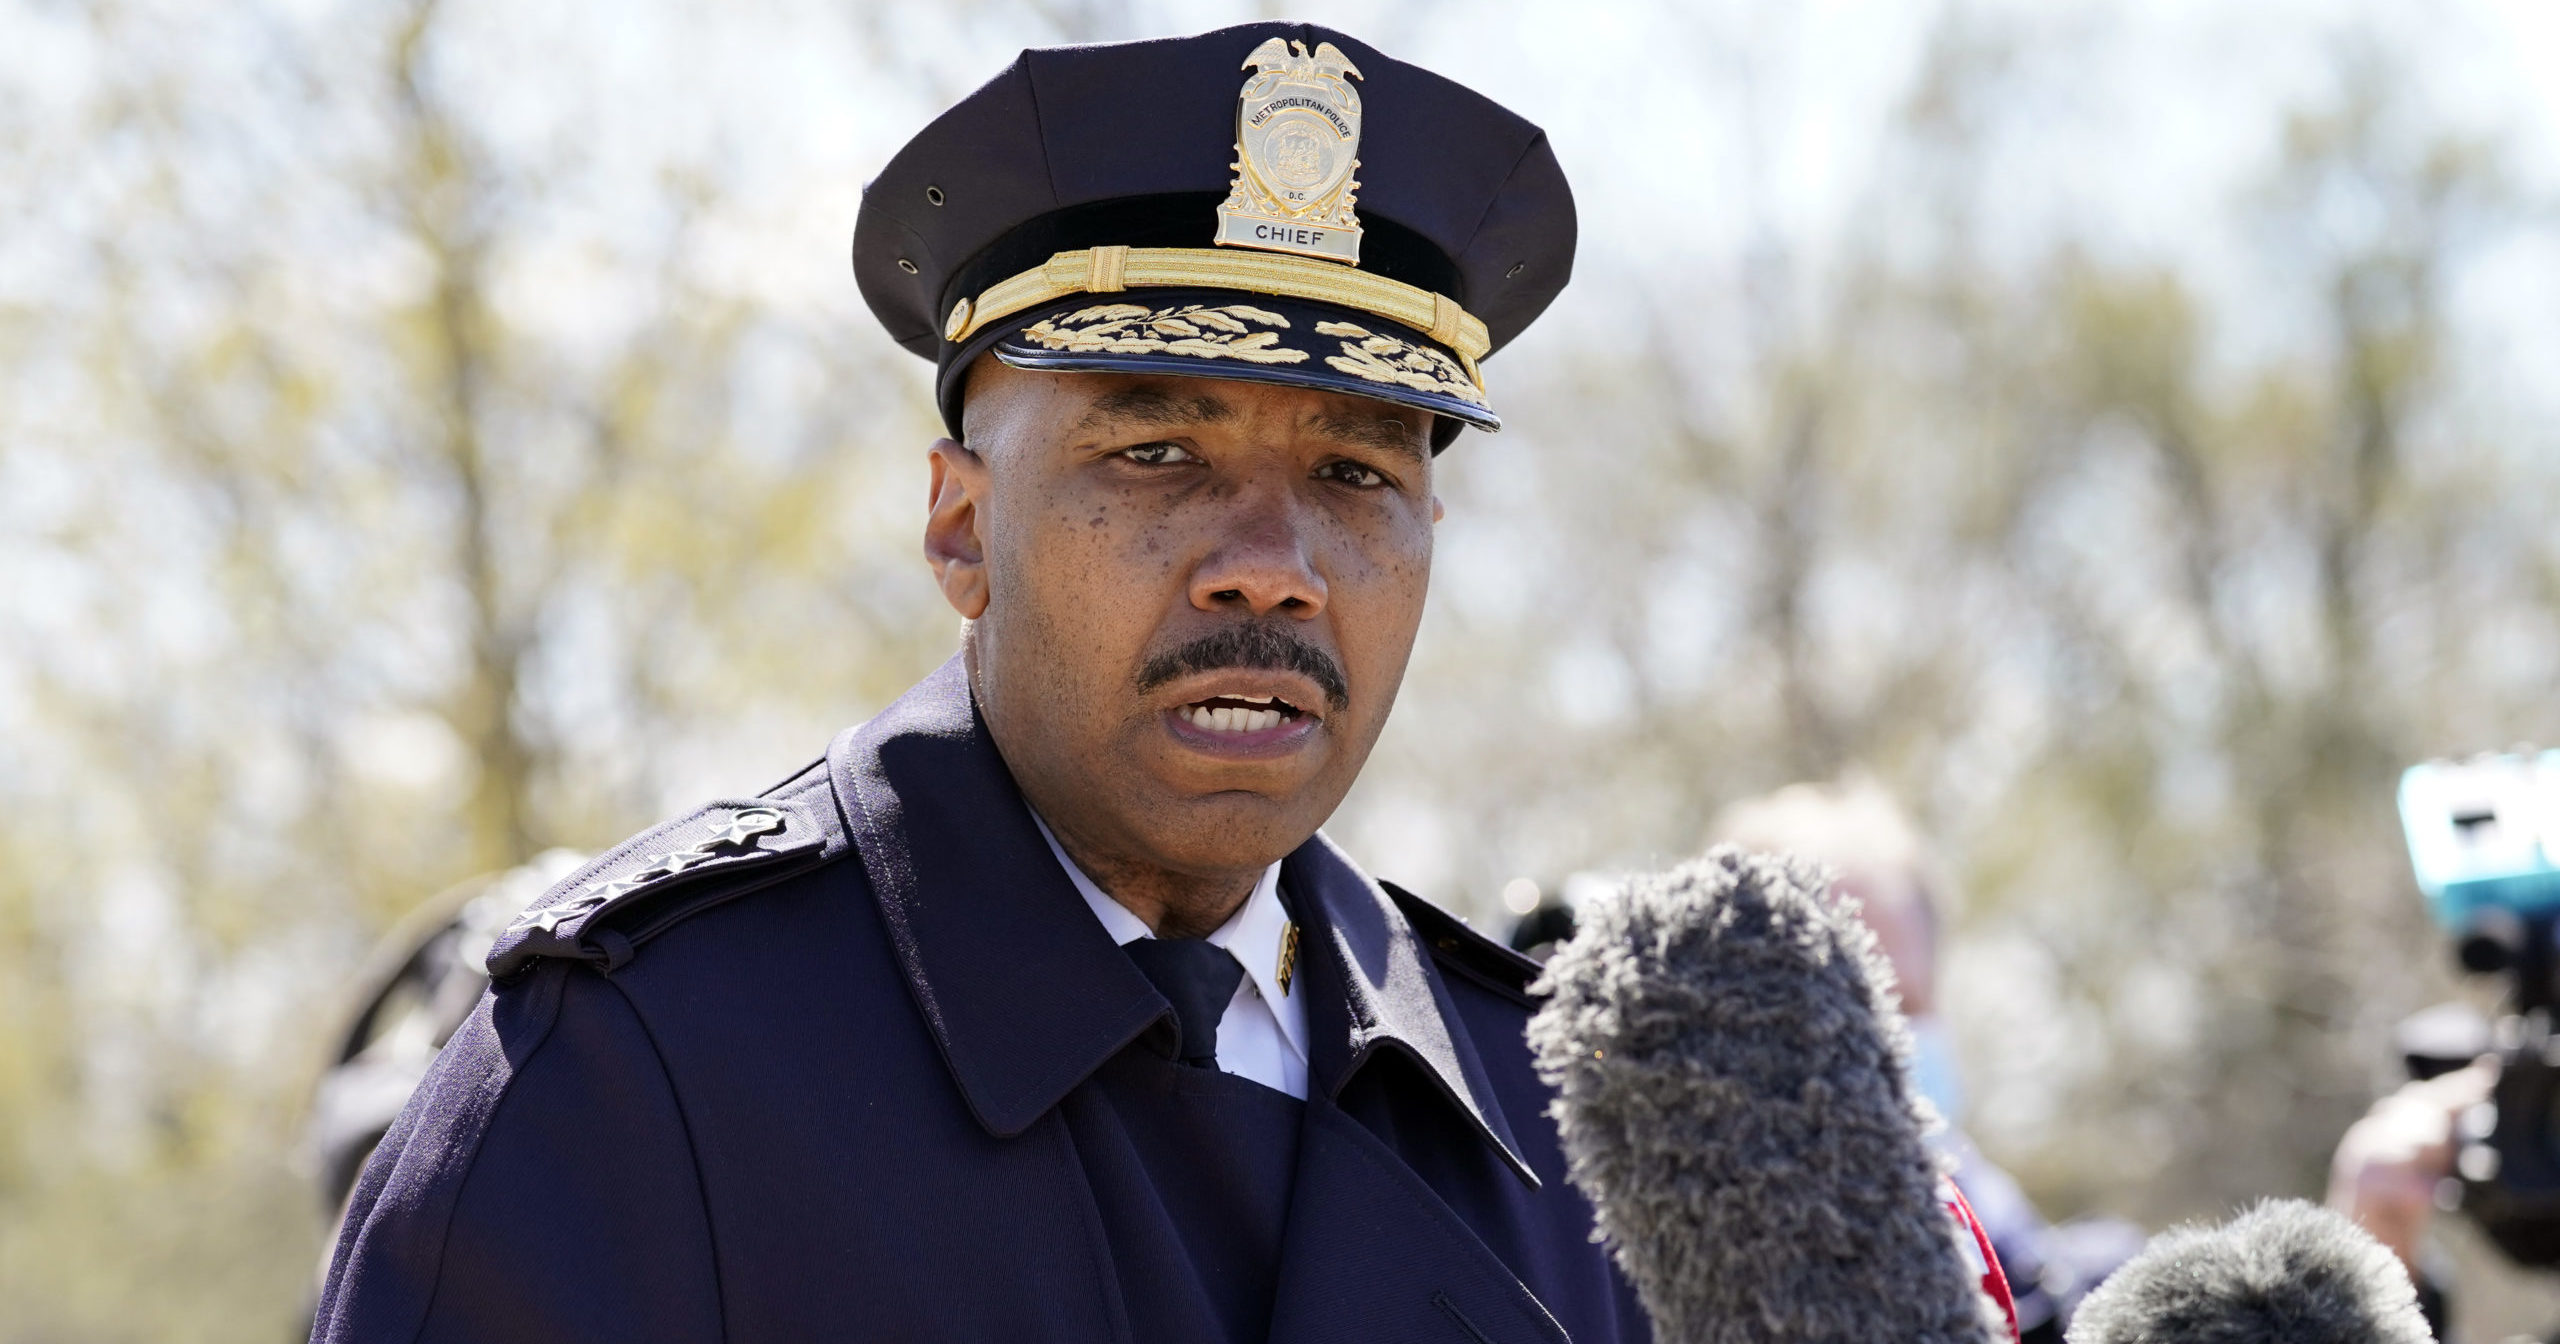 Washington Metropolitan Police Department Chief Robert Contee speaks during a news conference in Washington, D.C., on April 2, 2021.